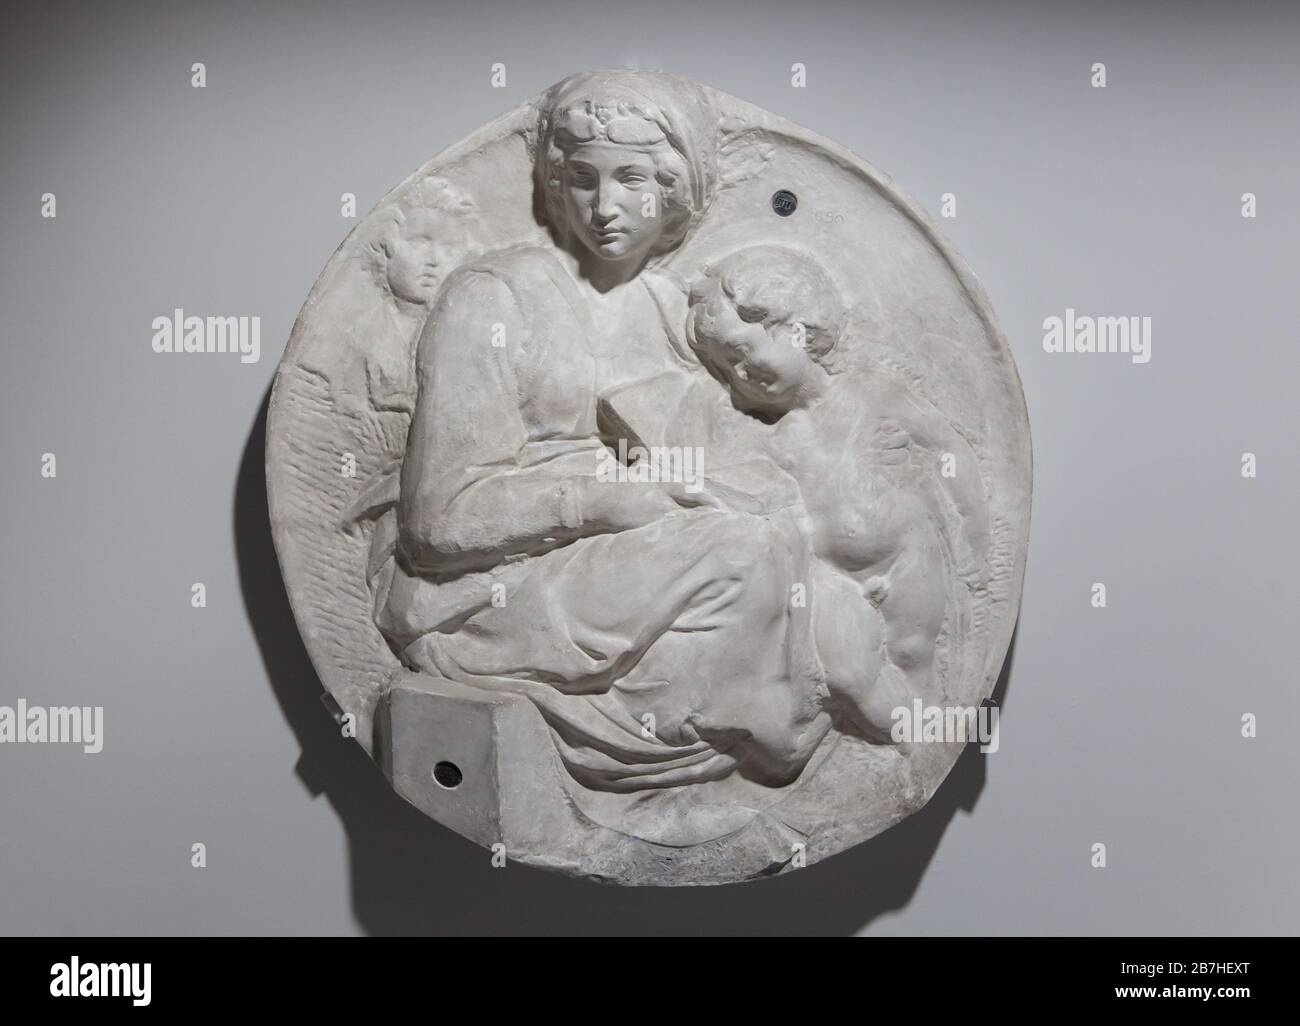 Plaster cast of the marble relief of Madonna and Child with Young Saint John the Baptist, known as the Pitti Tondo by Italian Renaissance sculptor Michelangelo Buonarroti (1505). Plaster cast dated from the end of the 19th century. Stock Photo